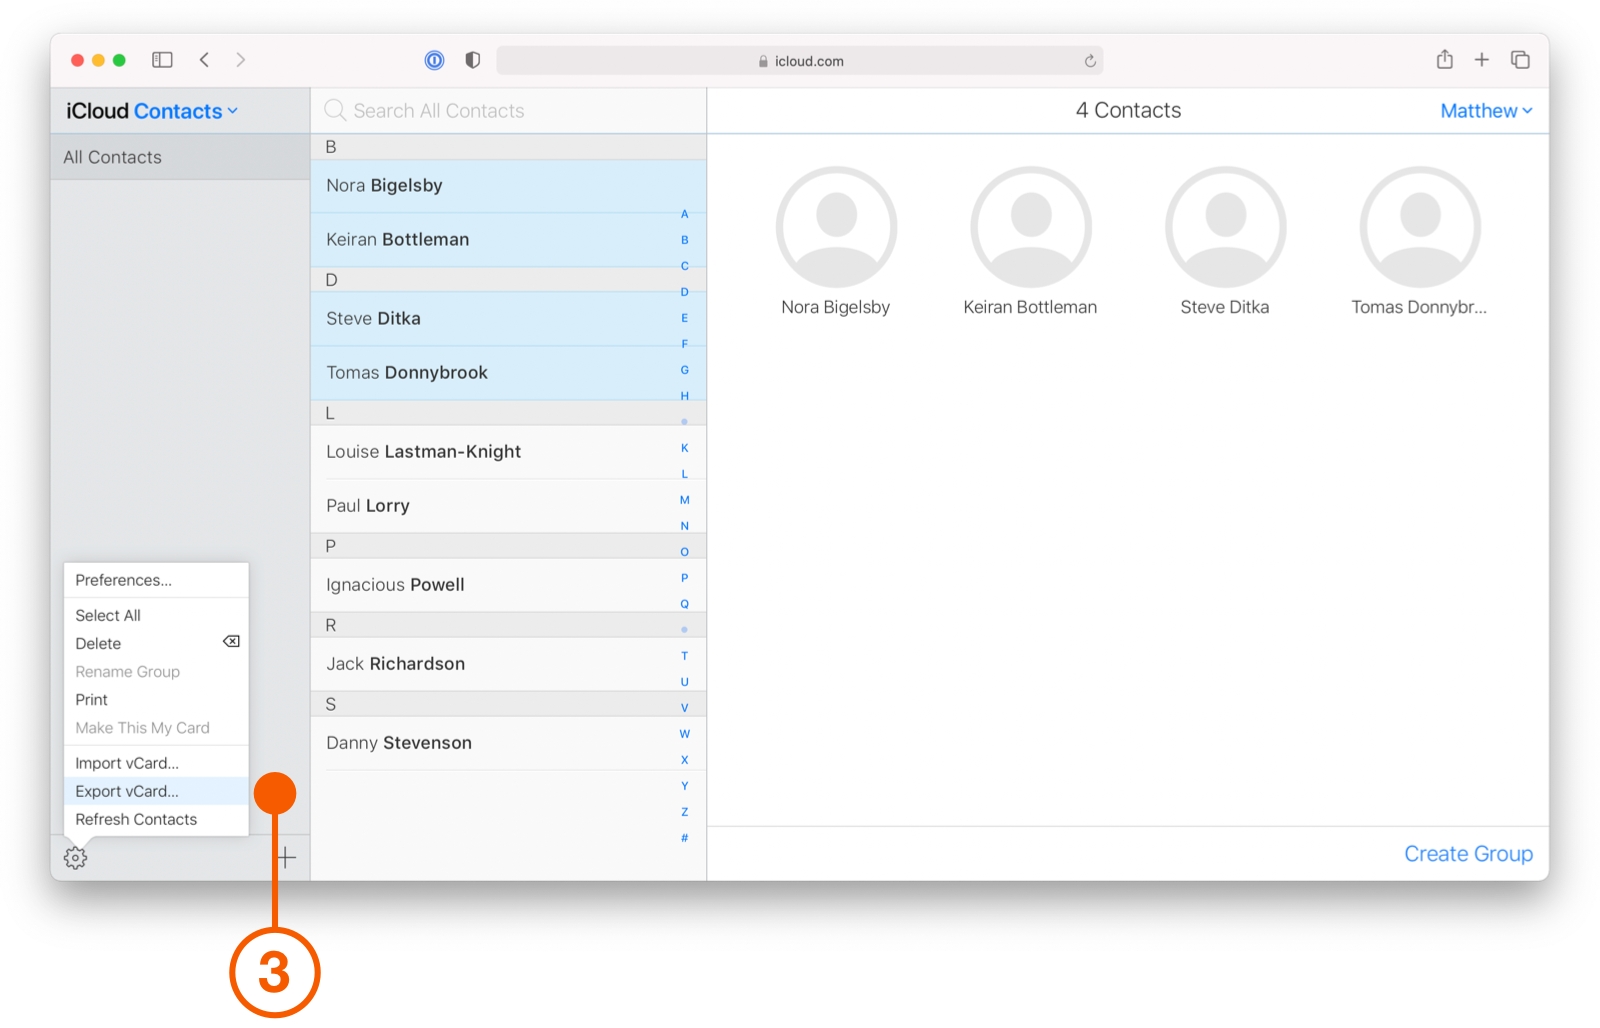 iCloud Contacts view selecting Export vCard